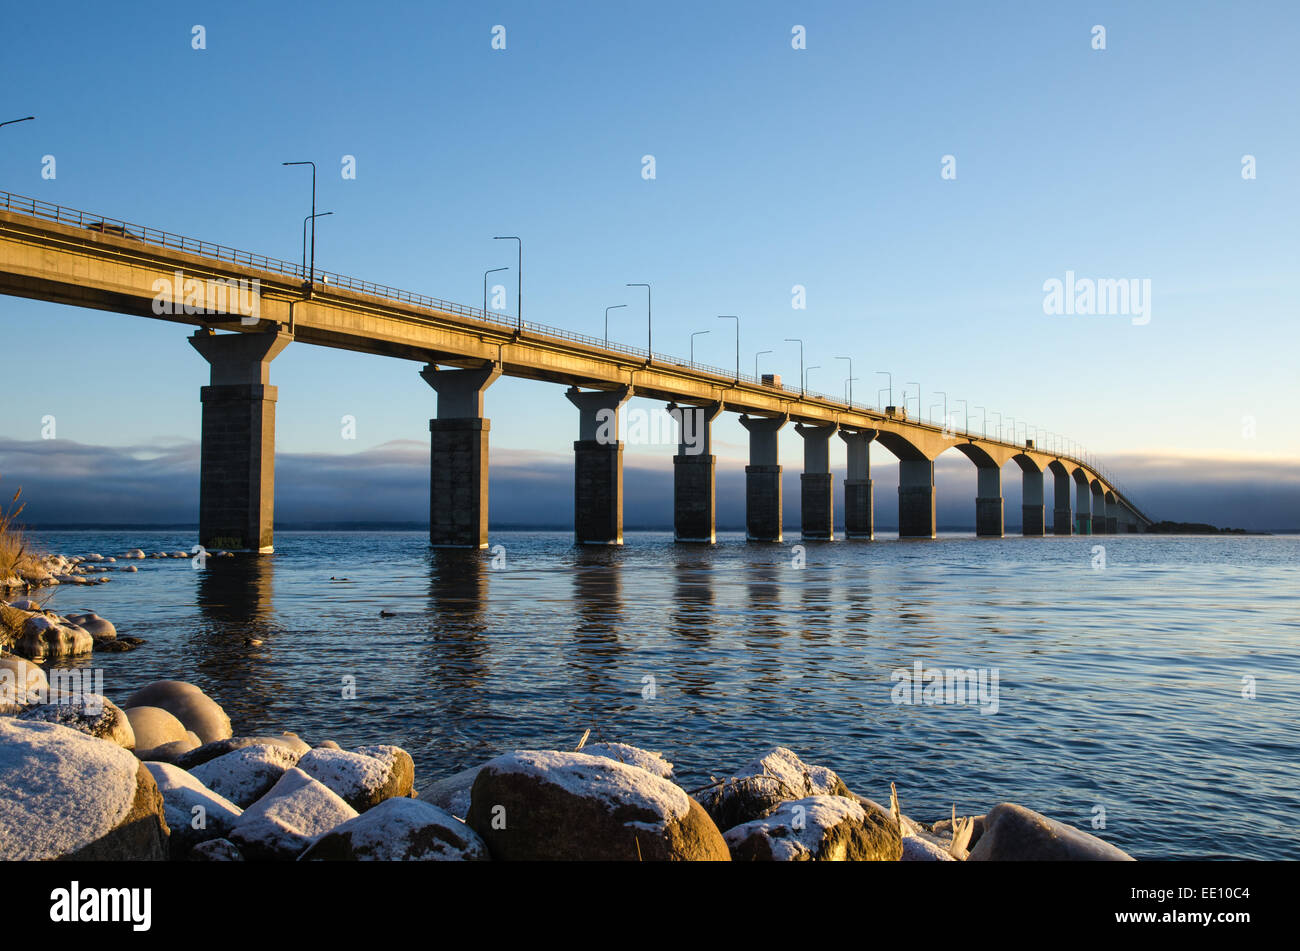 The Oland bridge in Sweden in the first winter morning sun. The bridge is one of the longest bridges in Europe and is connecting Stock Photo